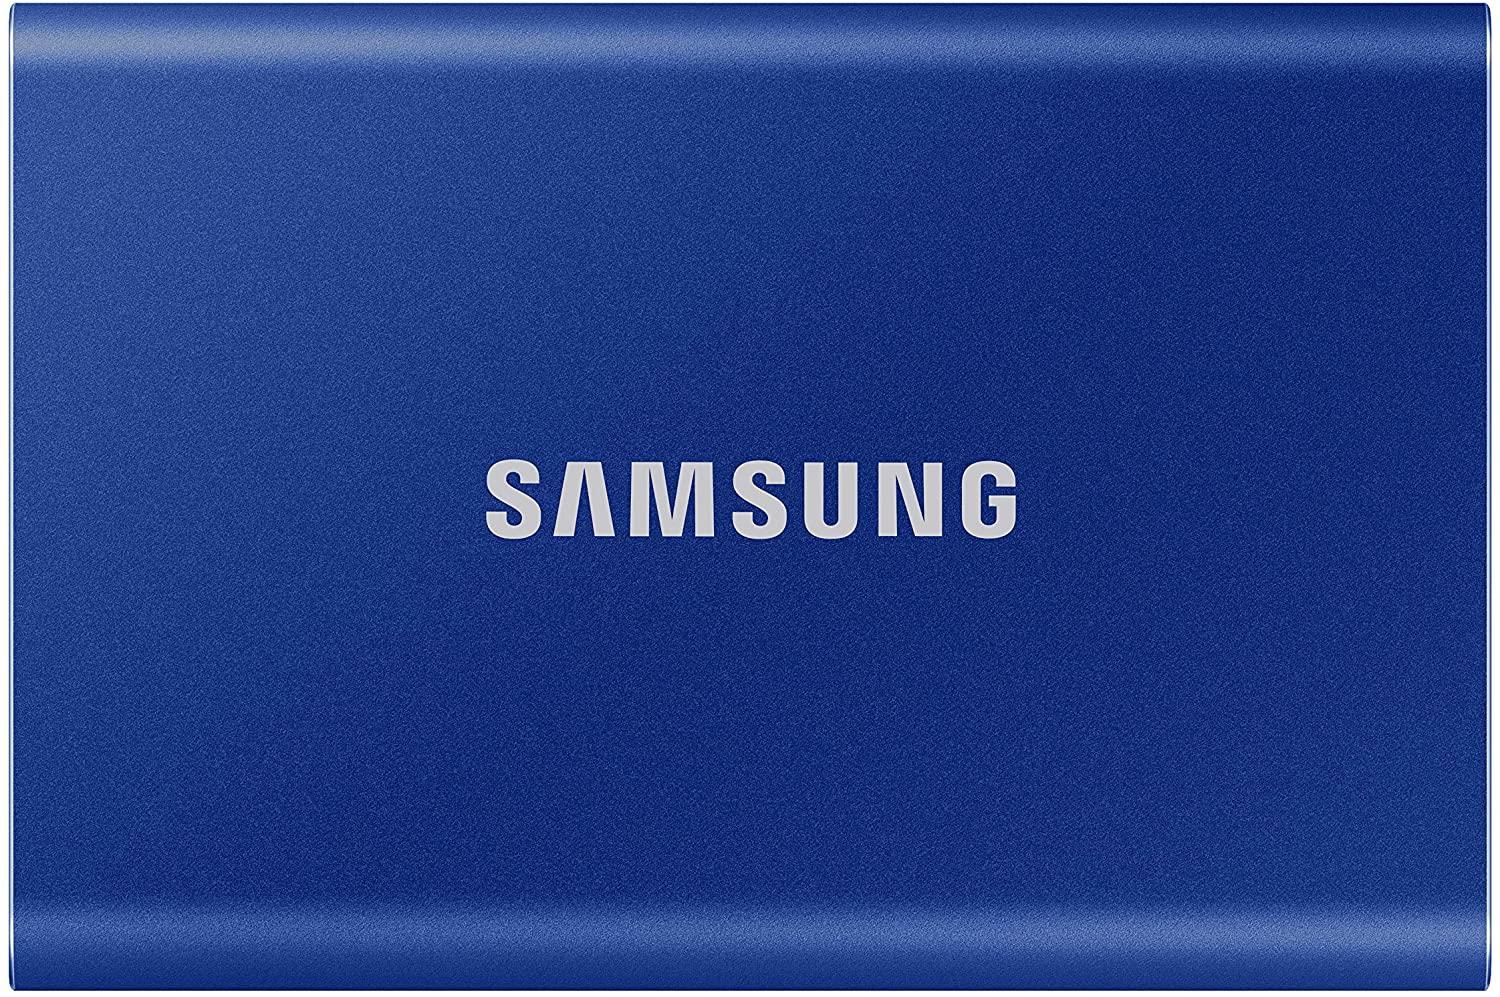 1TB Samsung T7 USB 3.2 Portable Solid State Drive for $159.99 Shipped